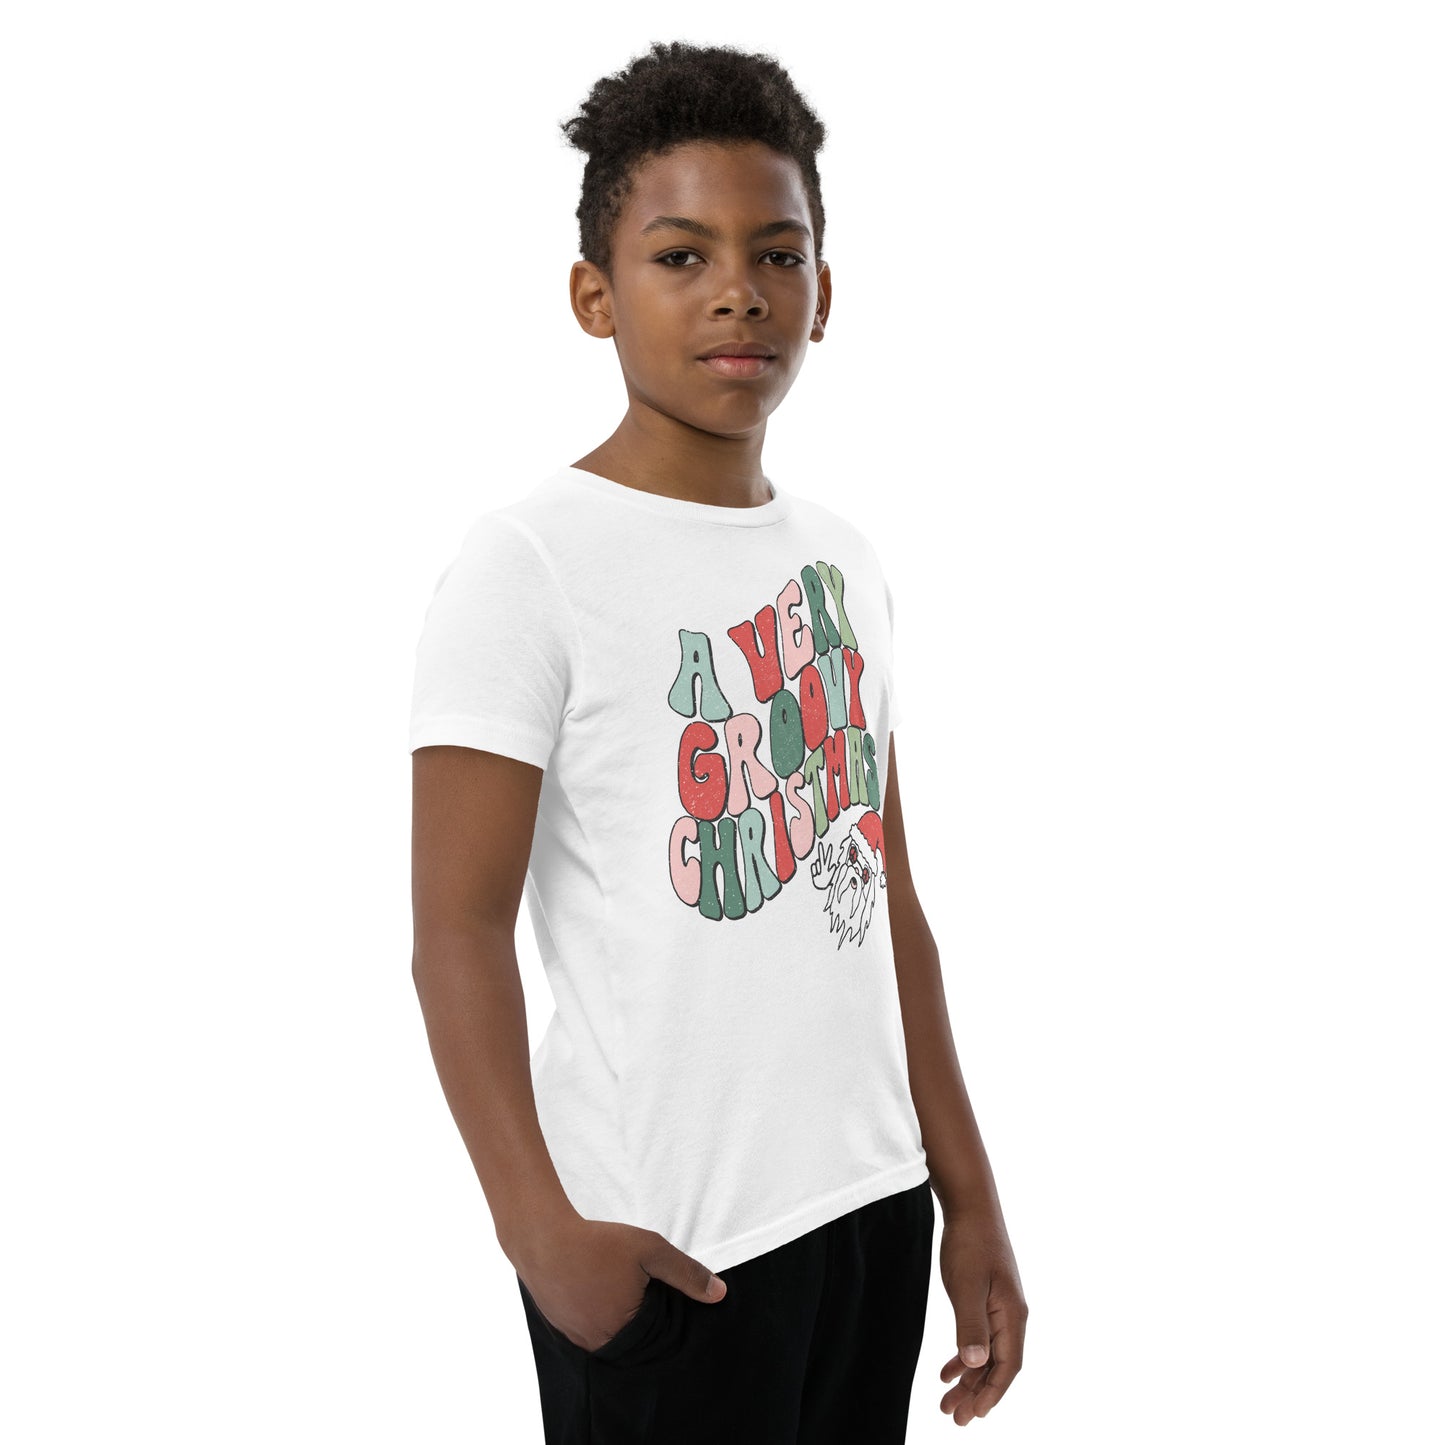 "Groovy Christmas" Youth T-Shirt